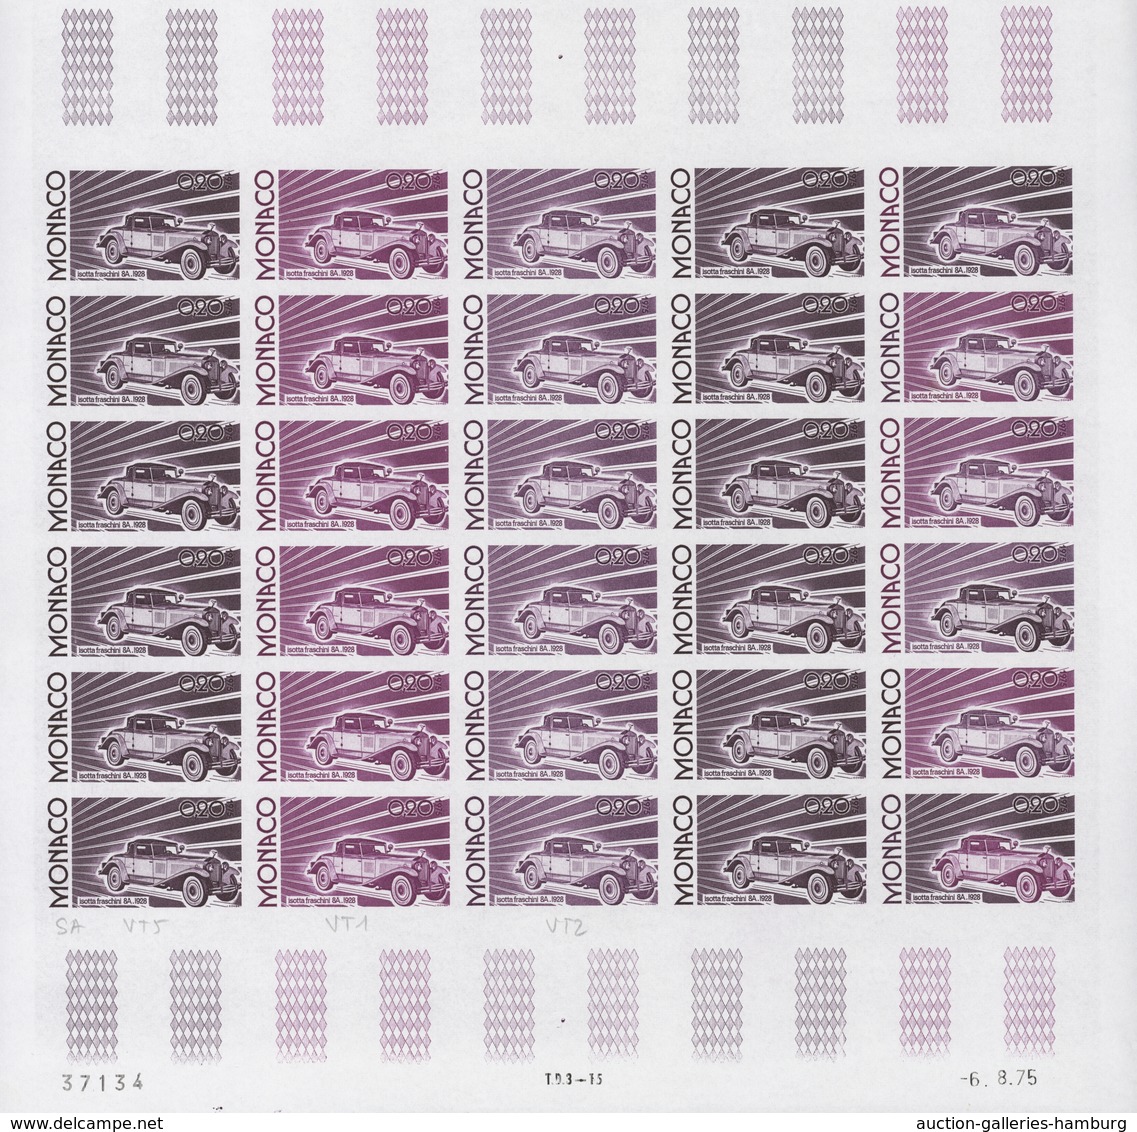 Monaco: 1973/1977, IMPERFORATE COLOUR PROOFS, MNH collection of 38 complete sheets (=1.040 proofs),